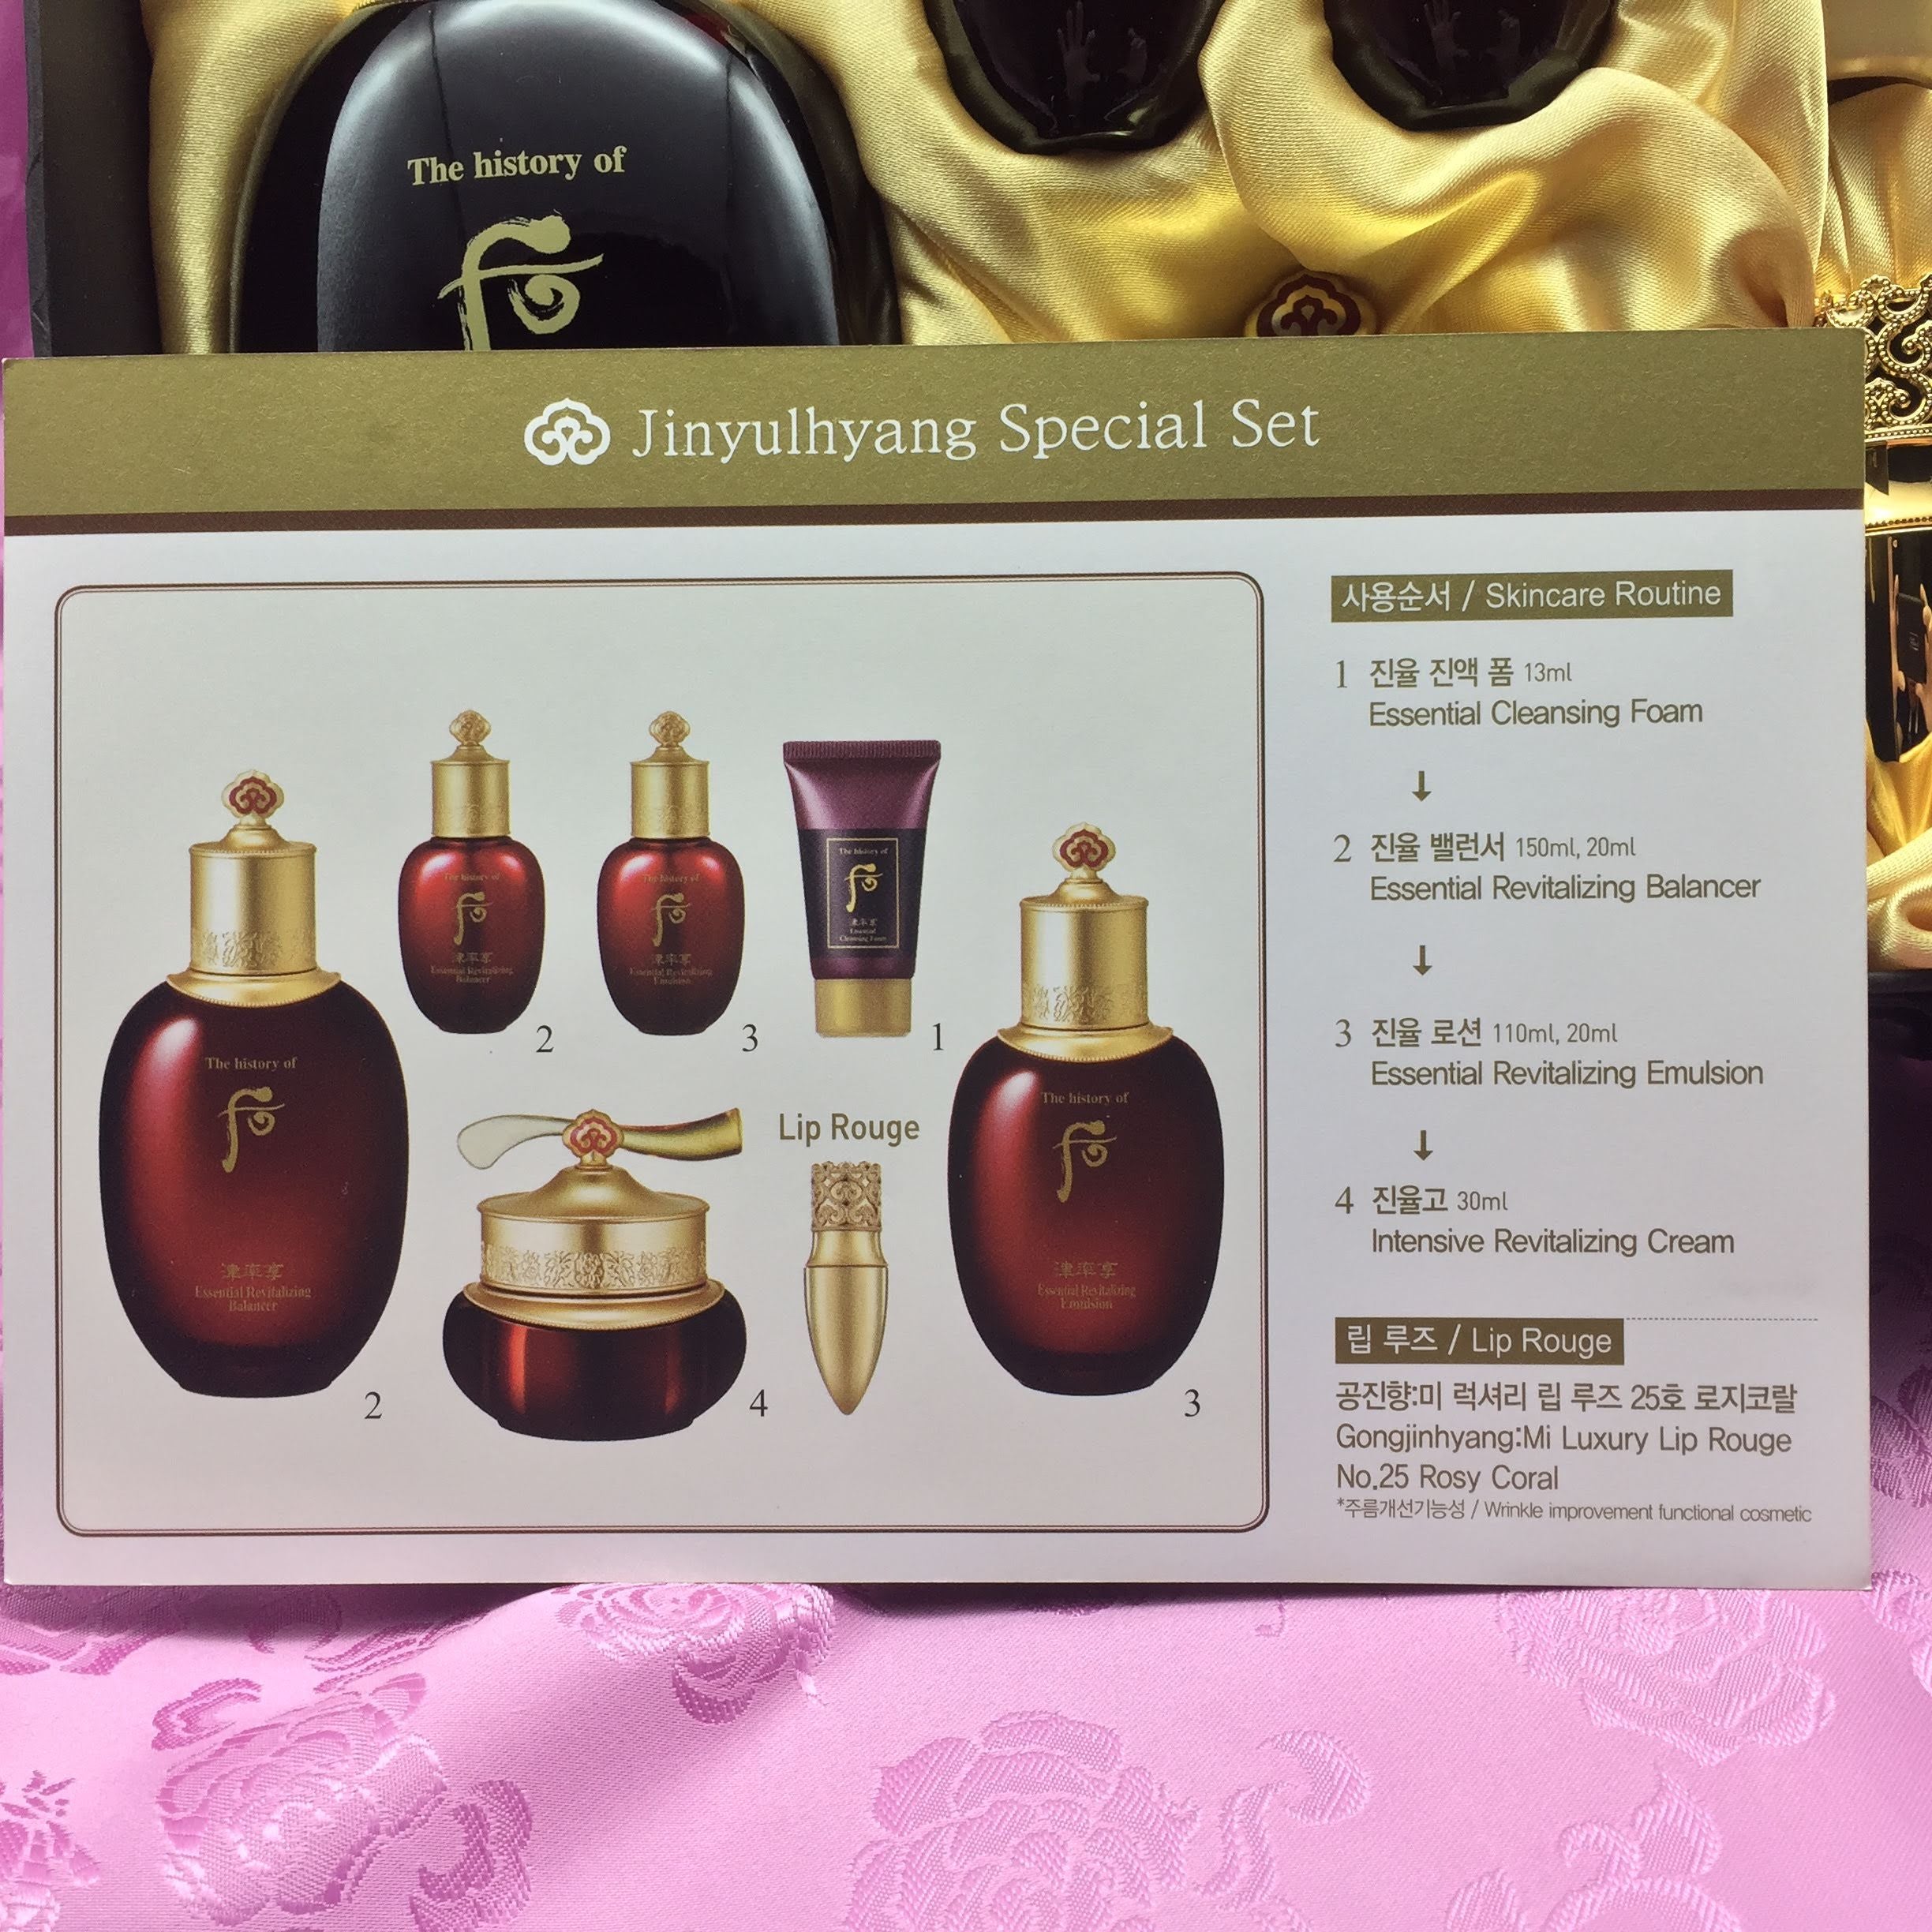 The History of Whoo Jinyulhyang Special Set - Goryeo Cosmetics worldwide shop 